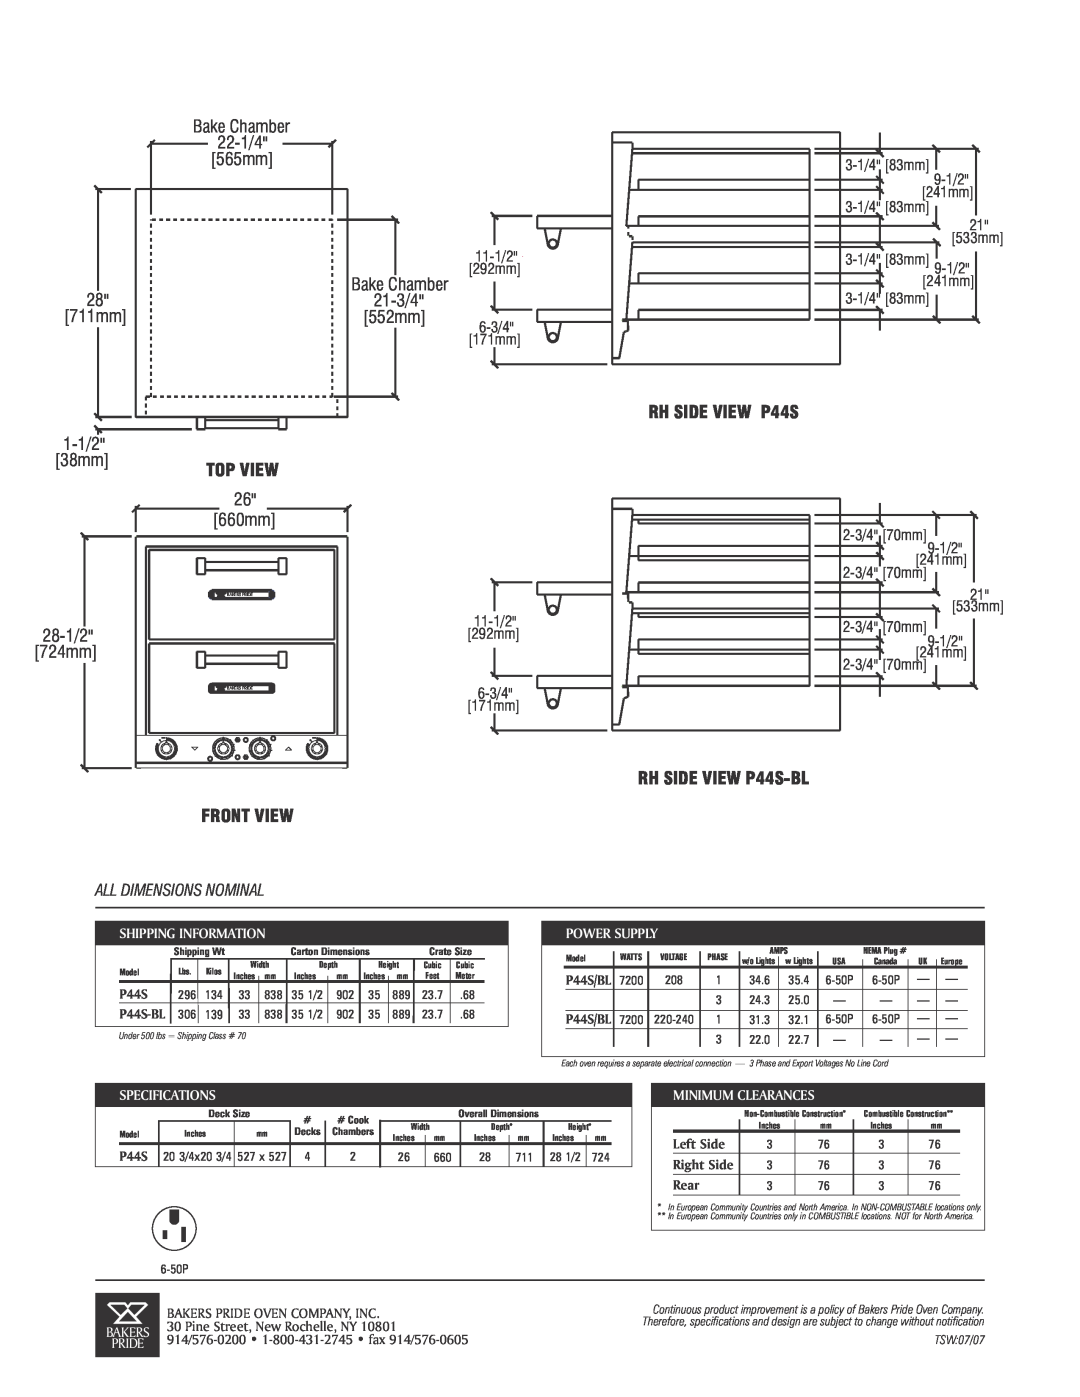 Bakers Pride Oven P44S-BL 1-1/238mm 28-1/2724mm, All Dimensions Nominal, Shipping Information, Power Supply, Left Side 